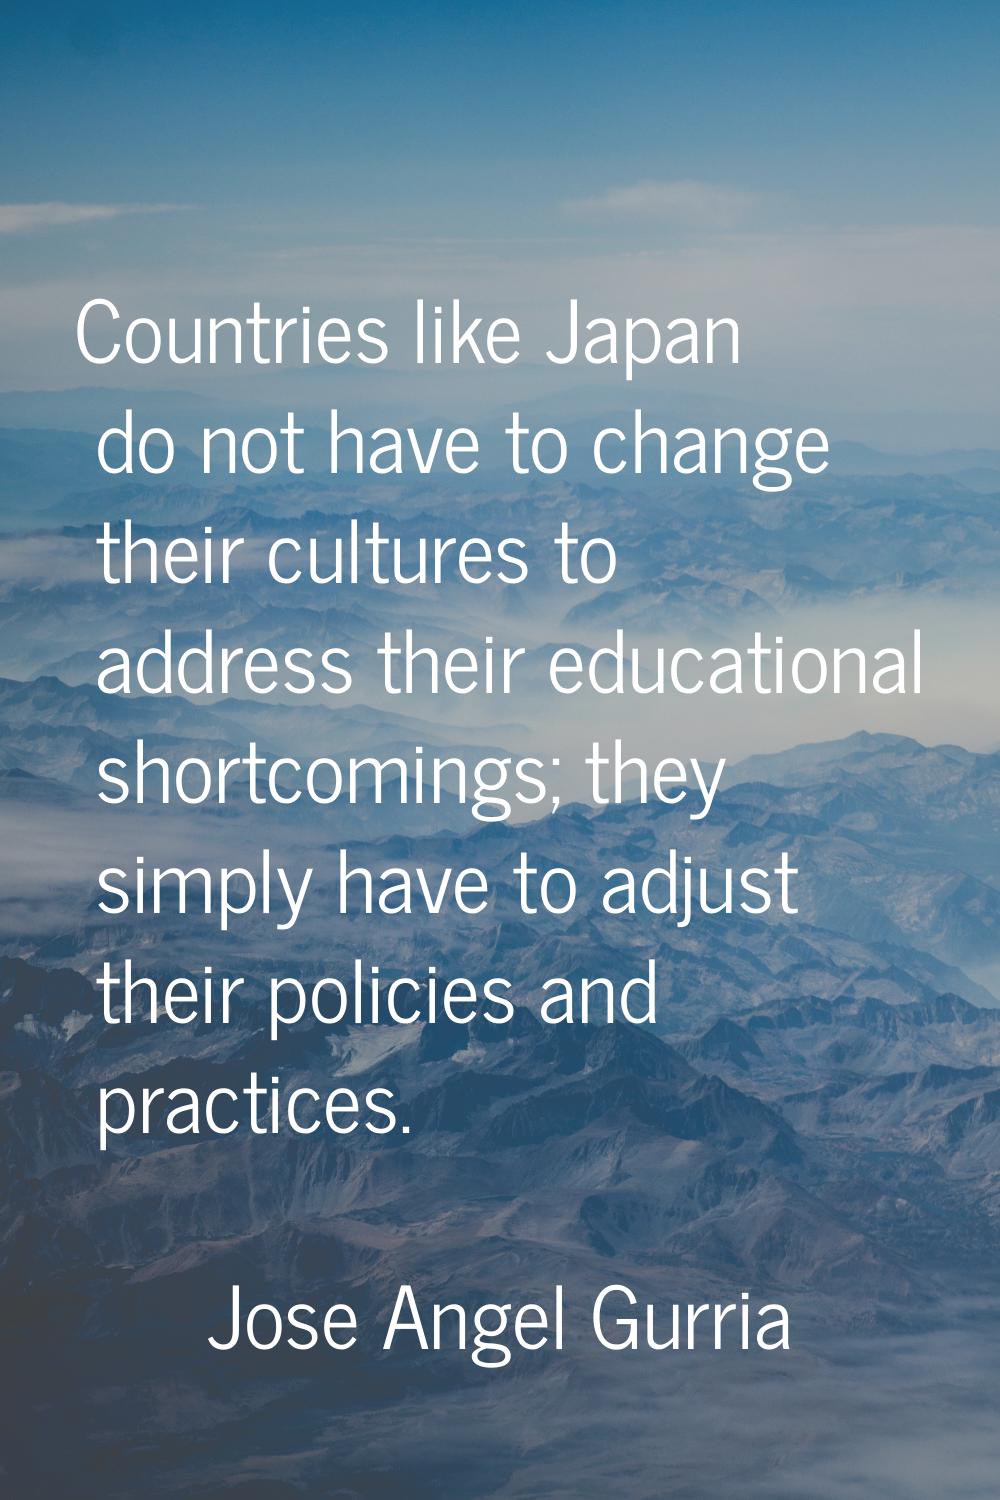 Countries like Japan do not have to change their cultures to address their educational shortcomings